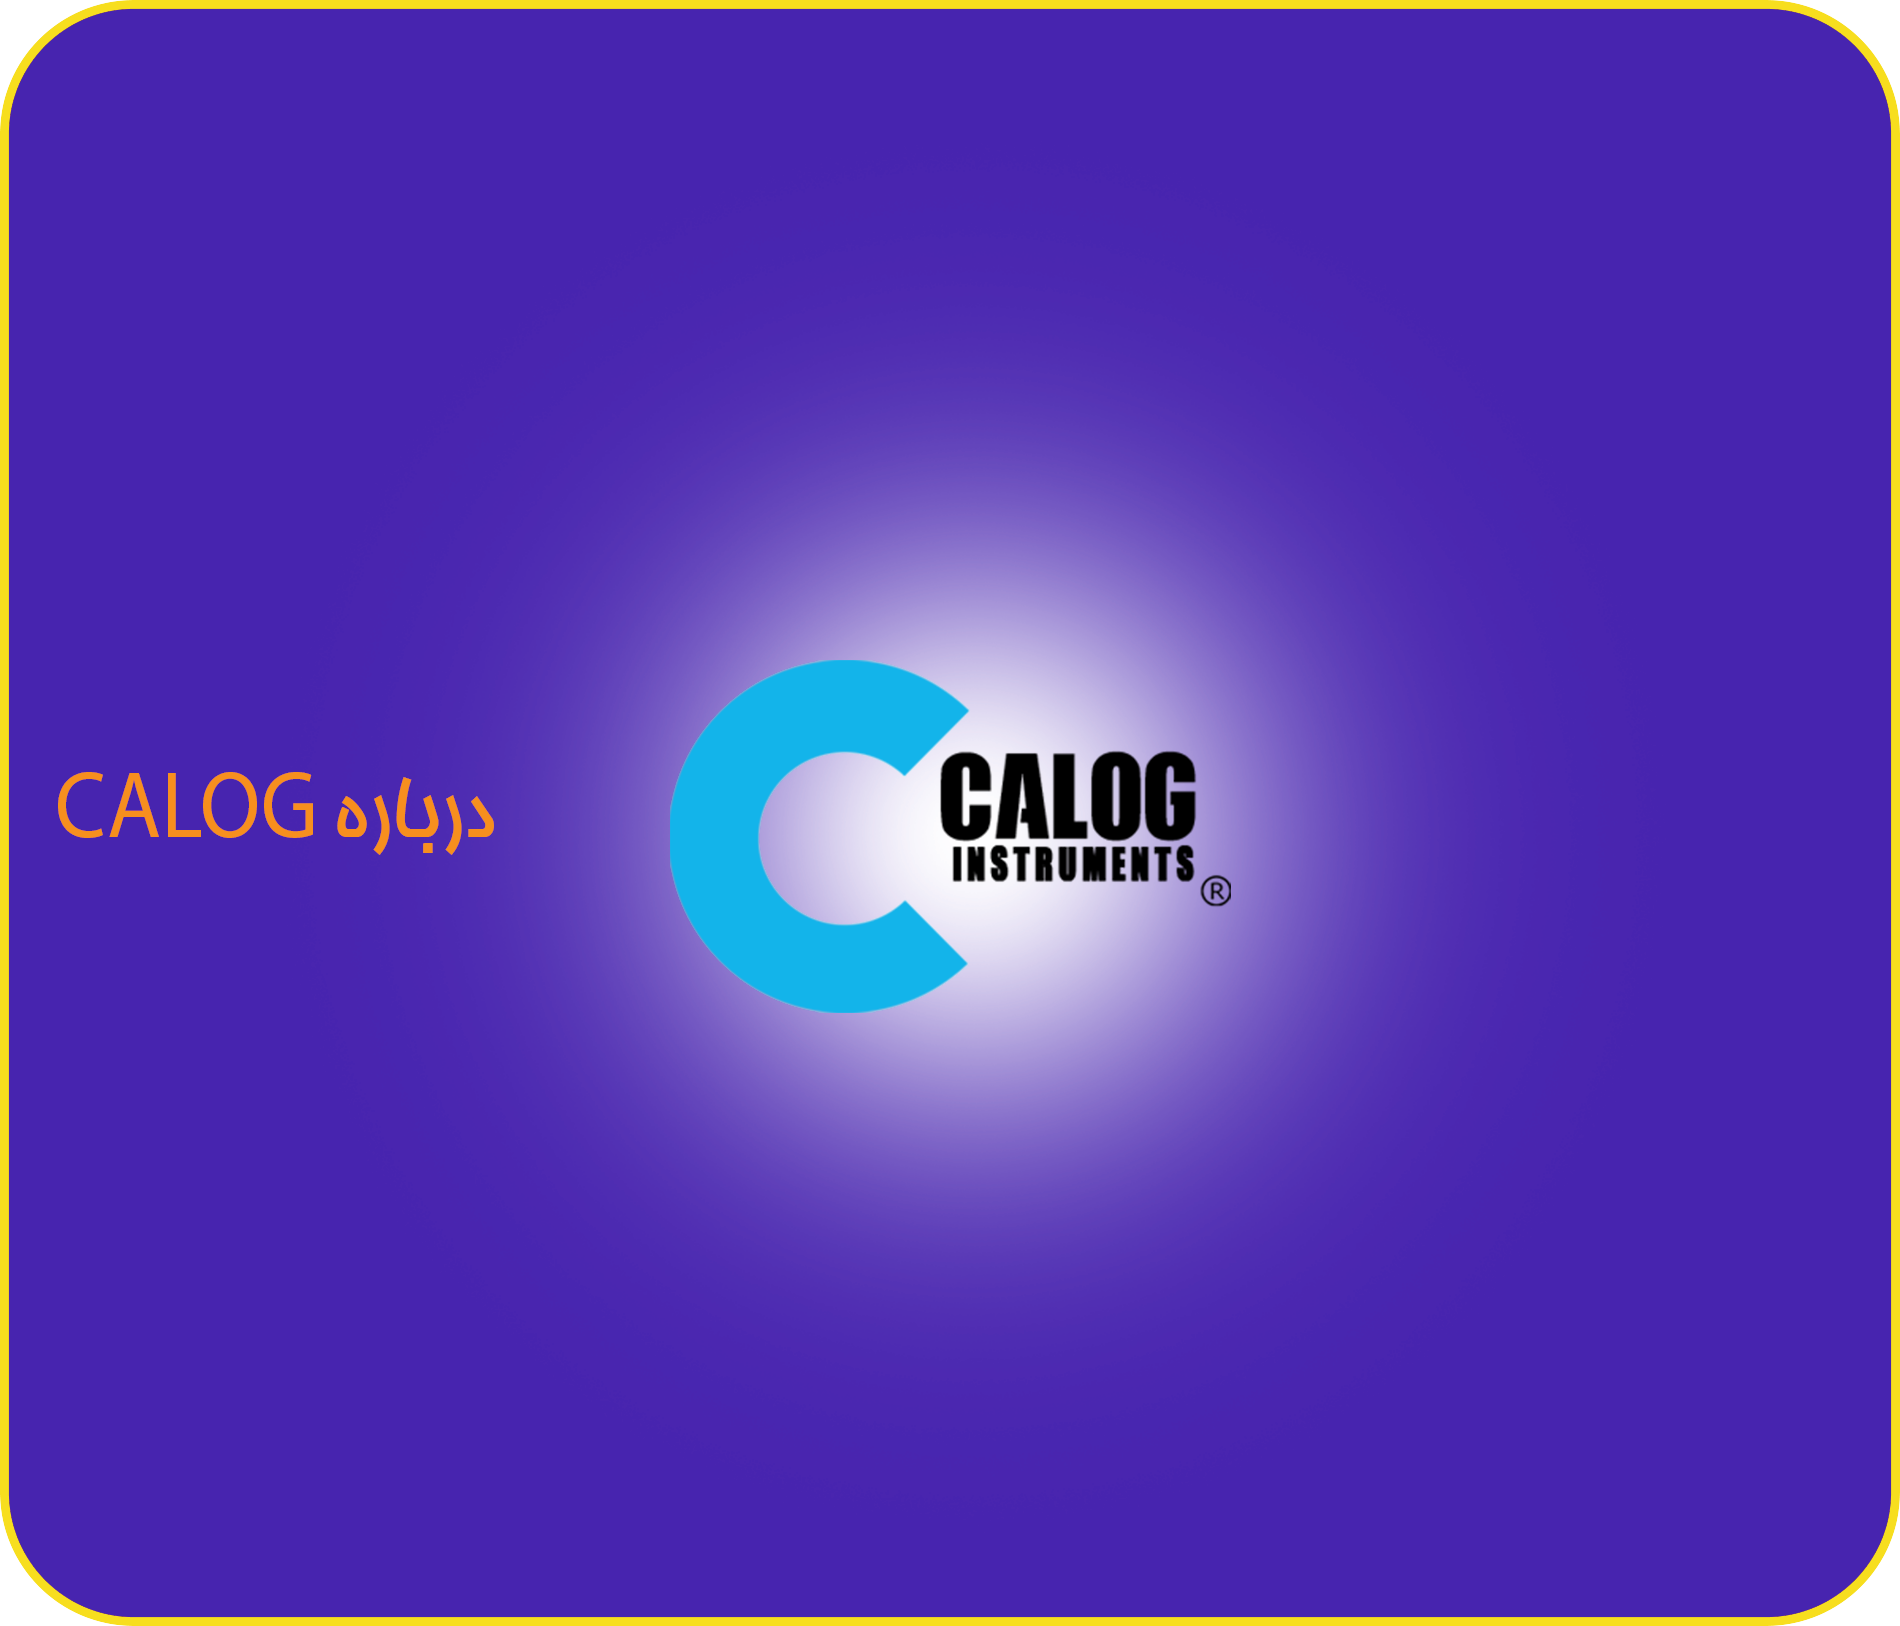 about Calog